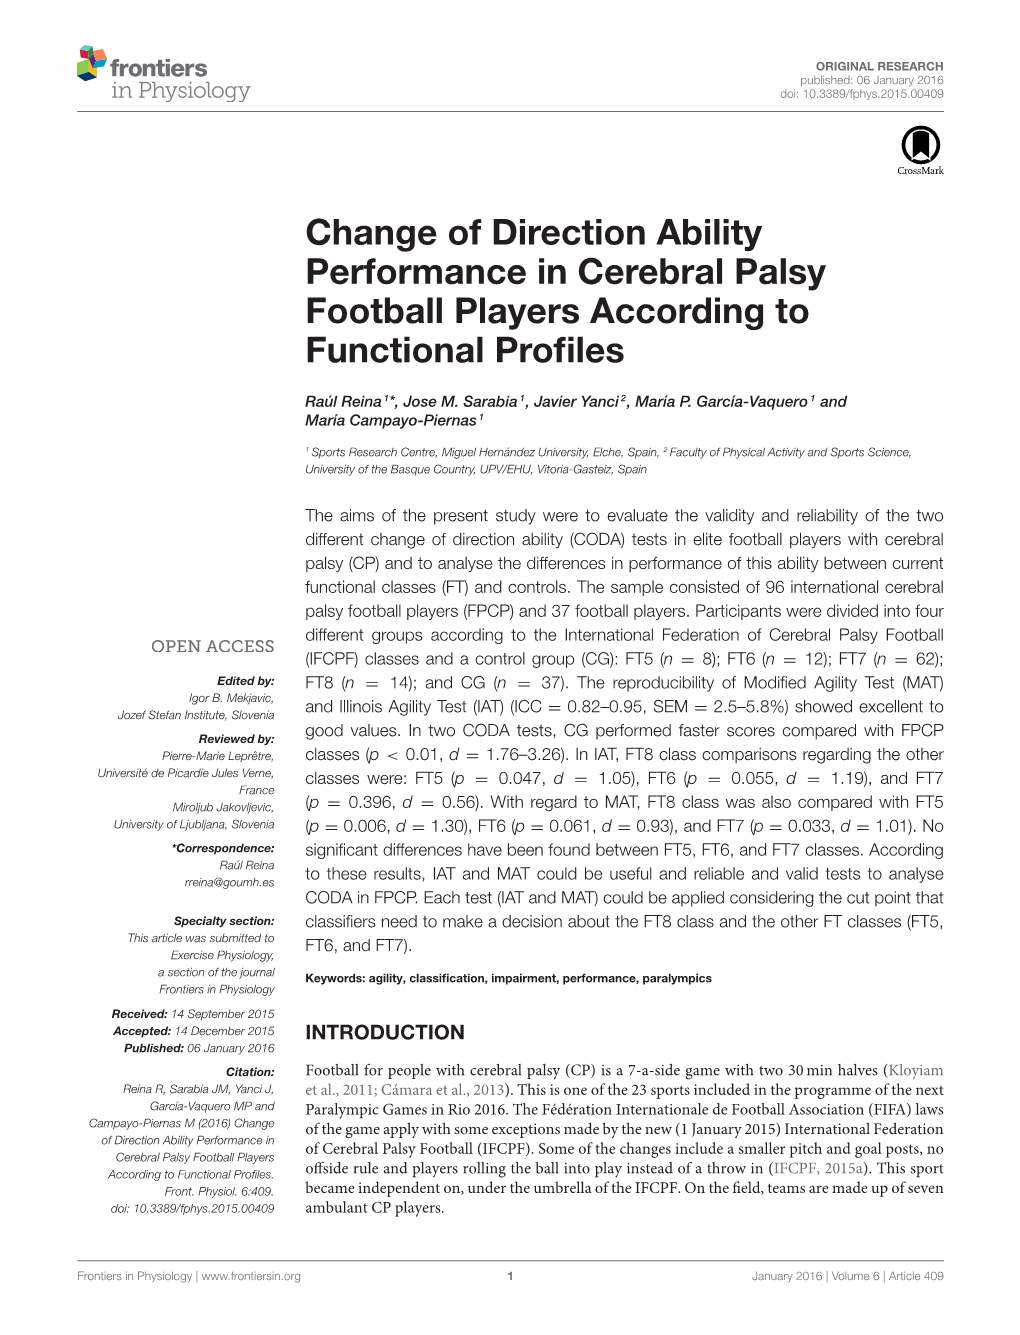 Change of Direction Ability Performance in Cerebral Palsy Football Players According to Functional Profiles